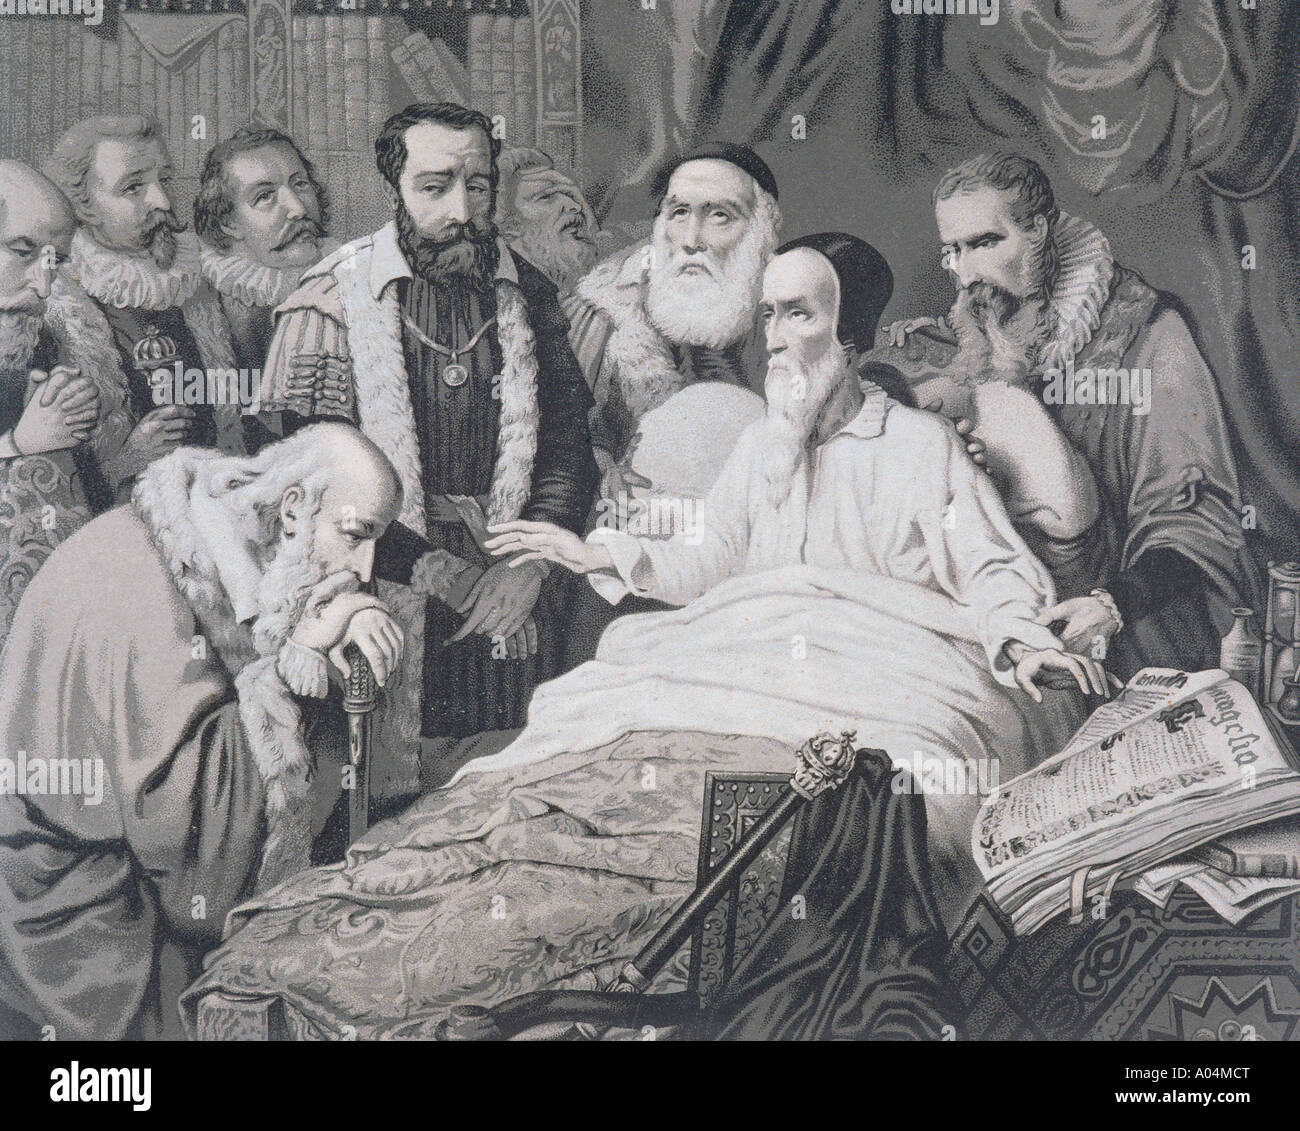 John Calvin, 1509 -1564. French Protestant theologian, pastor and reformer.   Seen here  on his death bed. From a 19th century engraving. Stock Photo